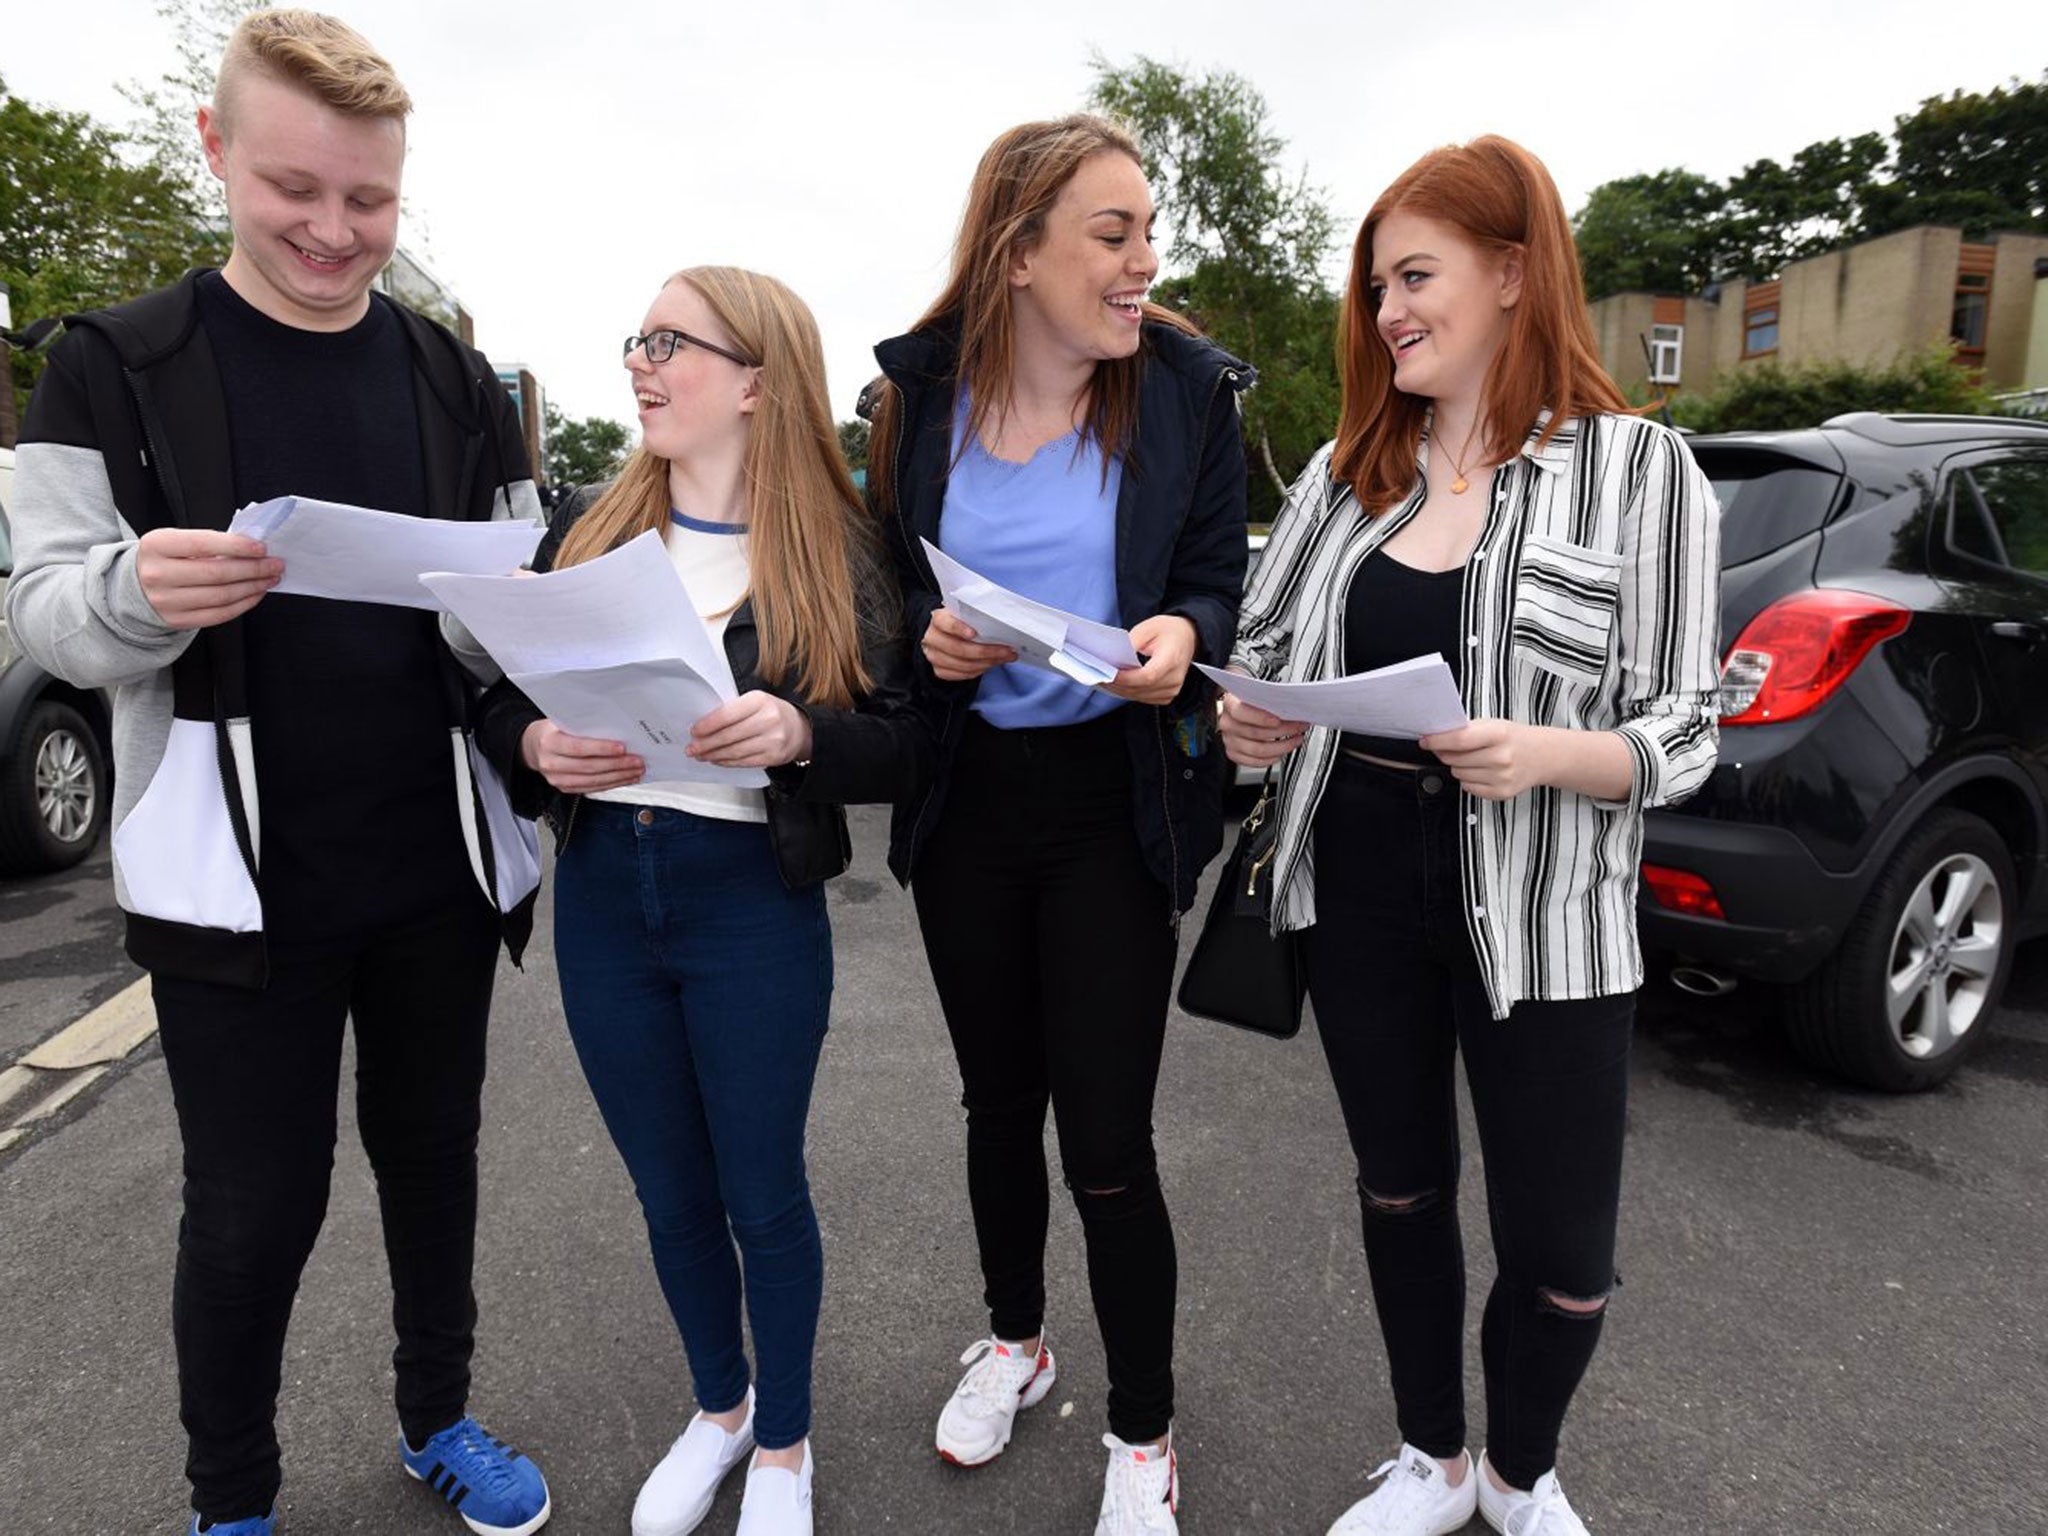 Emily Mott, 16, (second from left) receives her GCSE results at Royton and Crompton High School, Oldham.